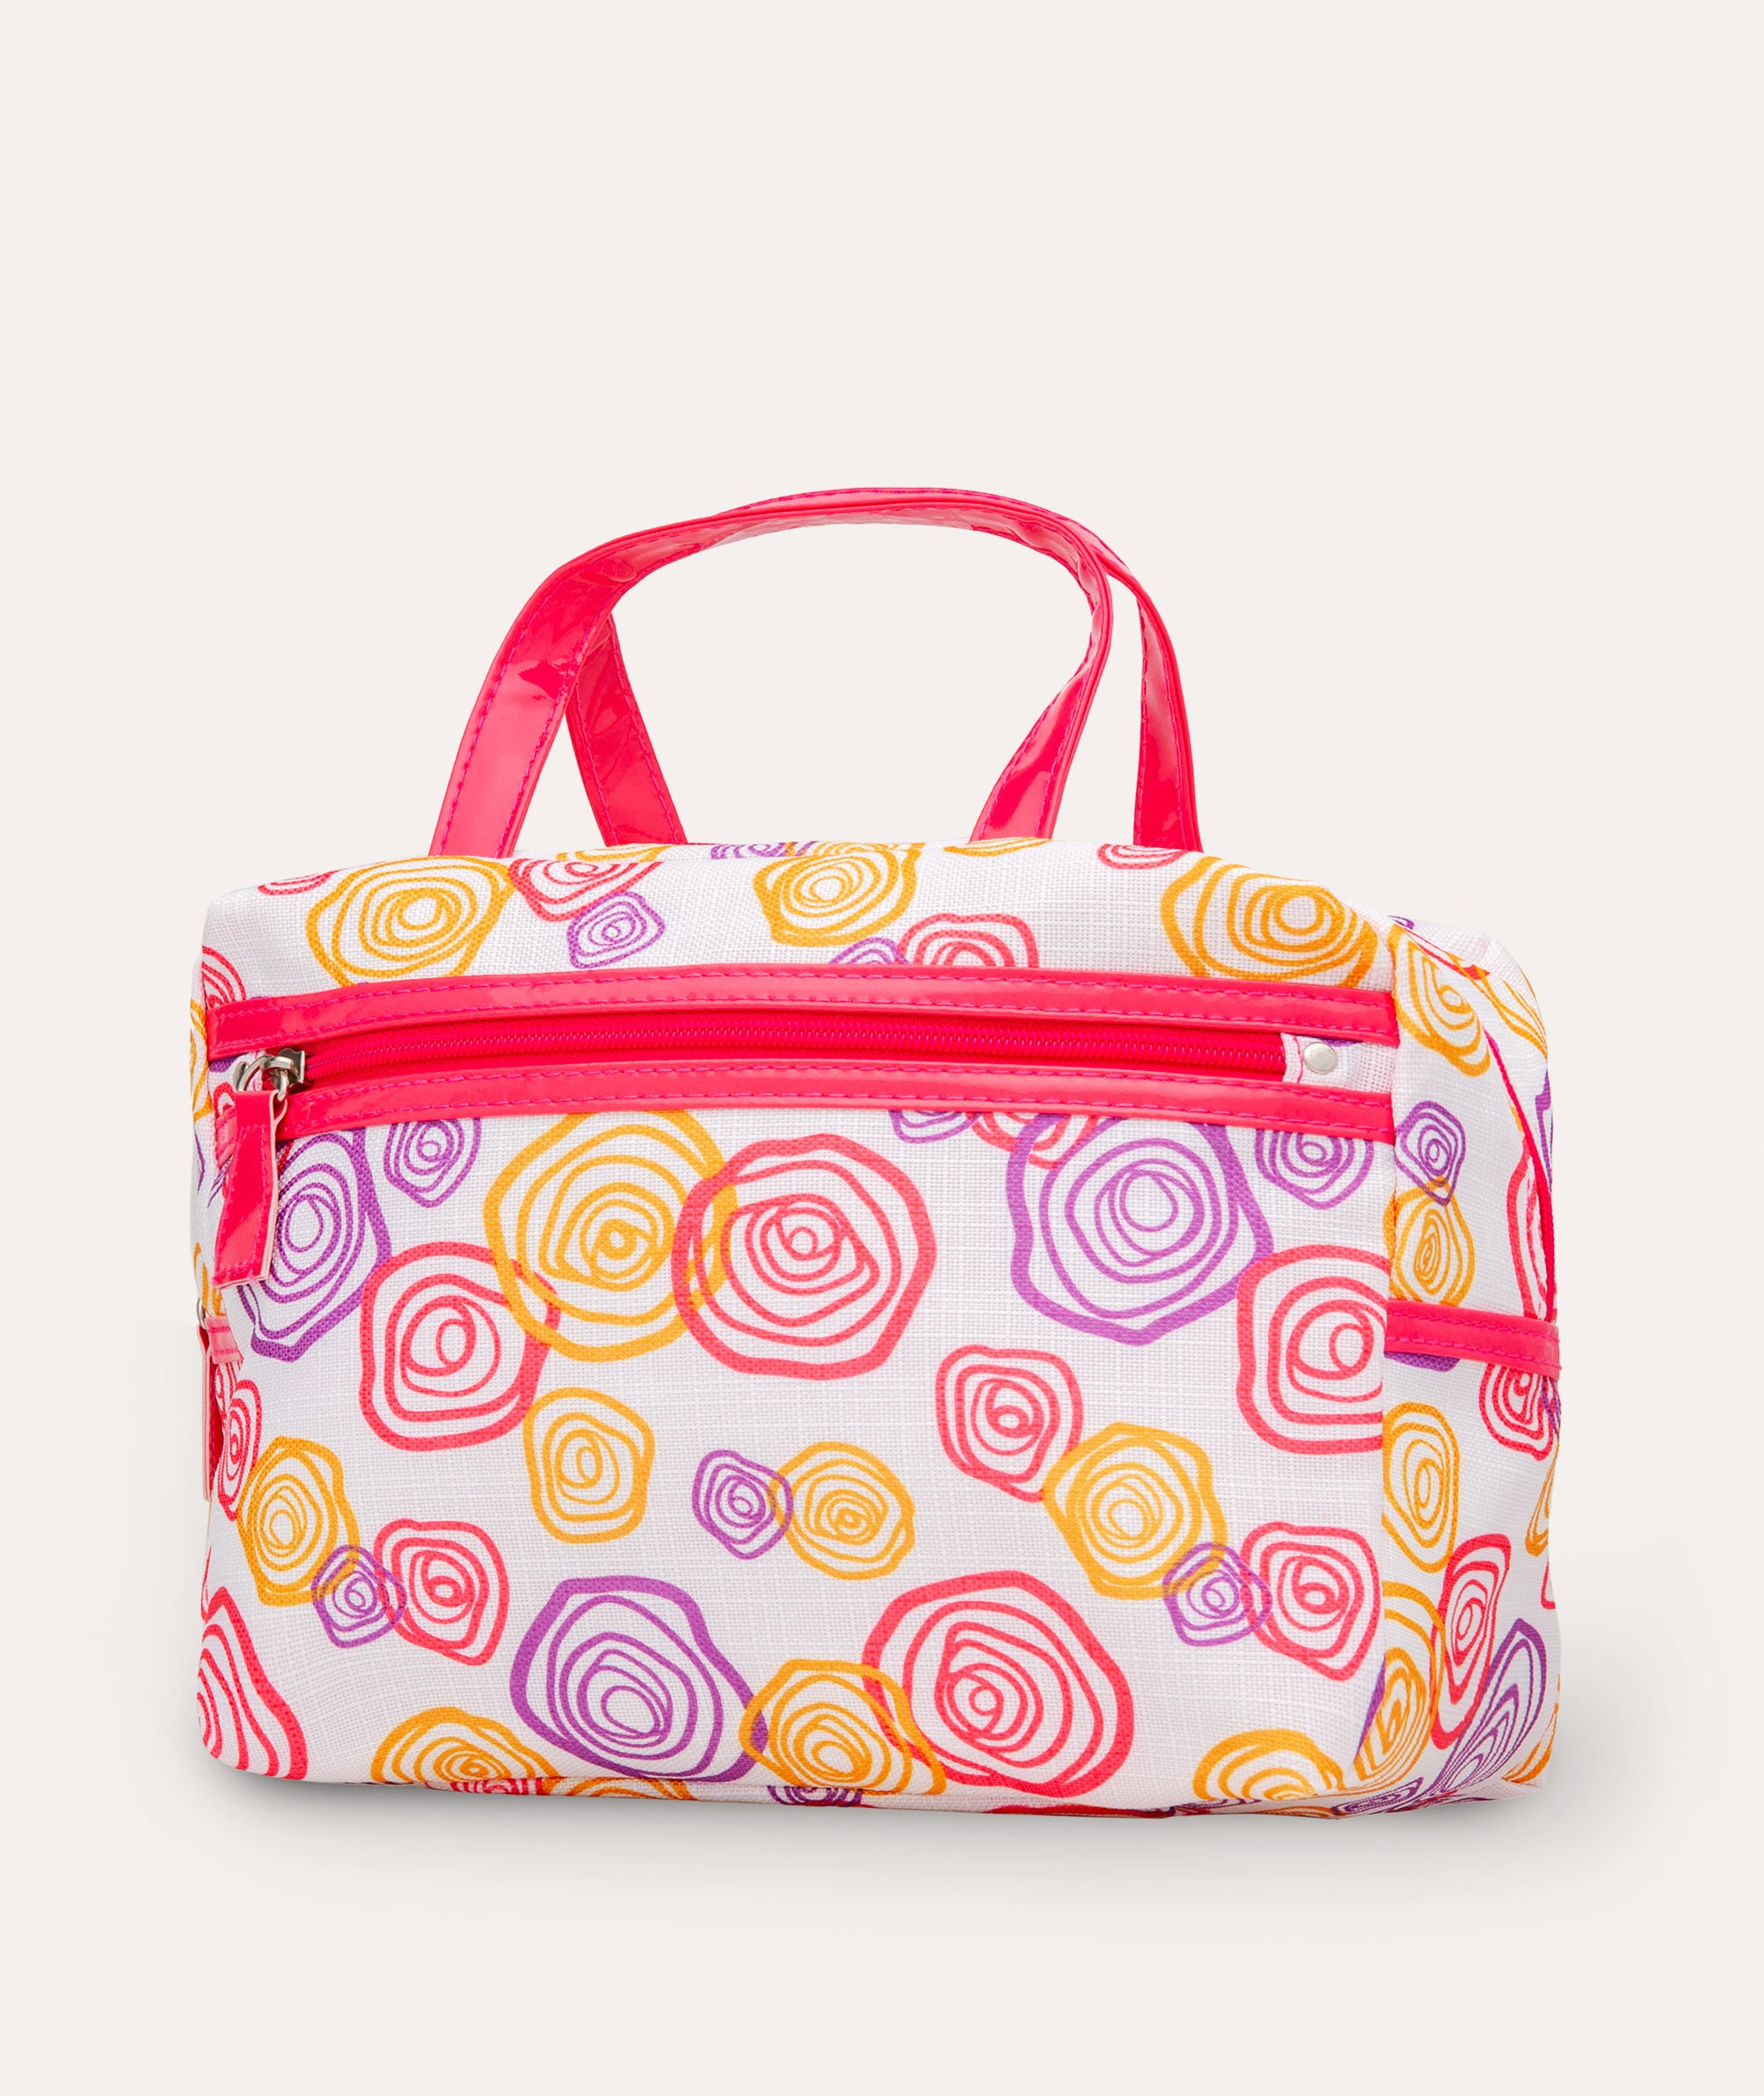 Picture of the Borghese 10 Piece Travel Gift Set swirl print bag